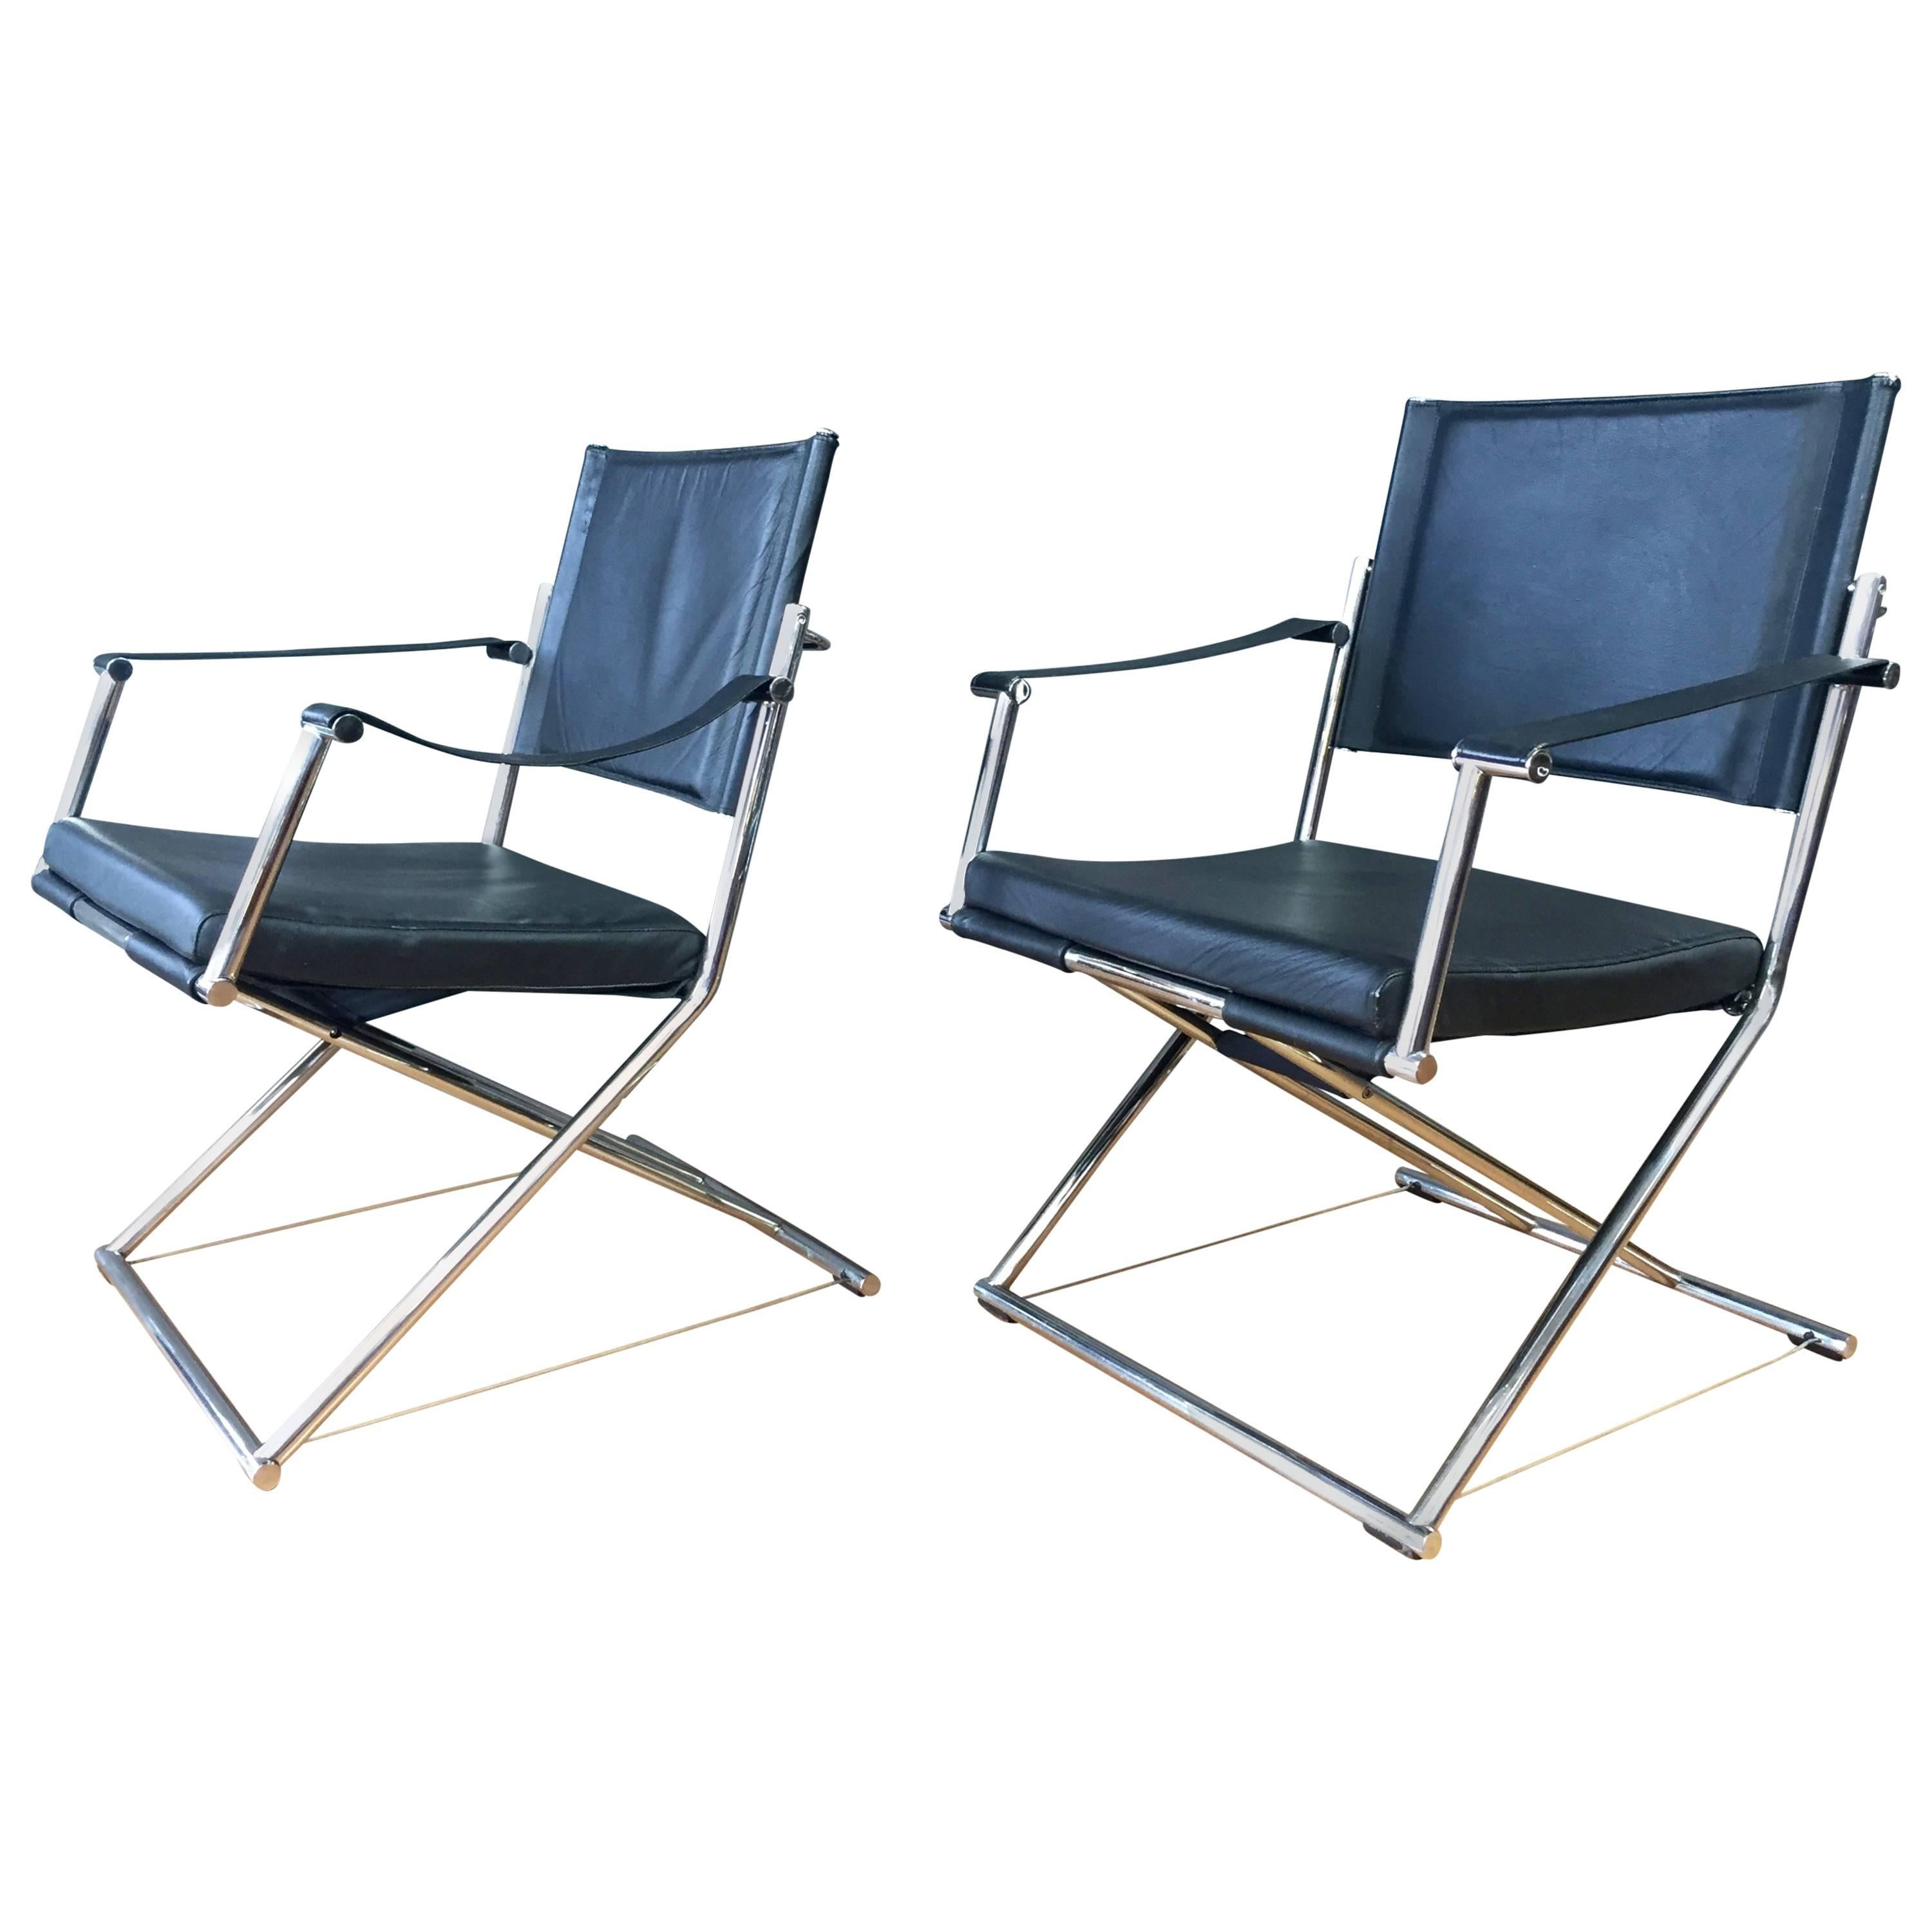 Pair of Sleek “Euroka” Folding Campaign Chairs or Gliders by Mark Singer